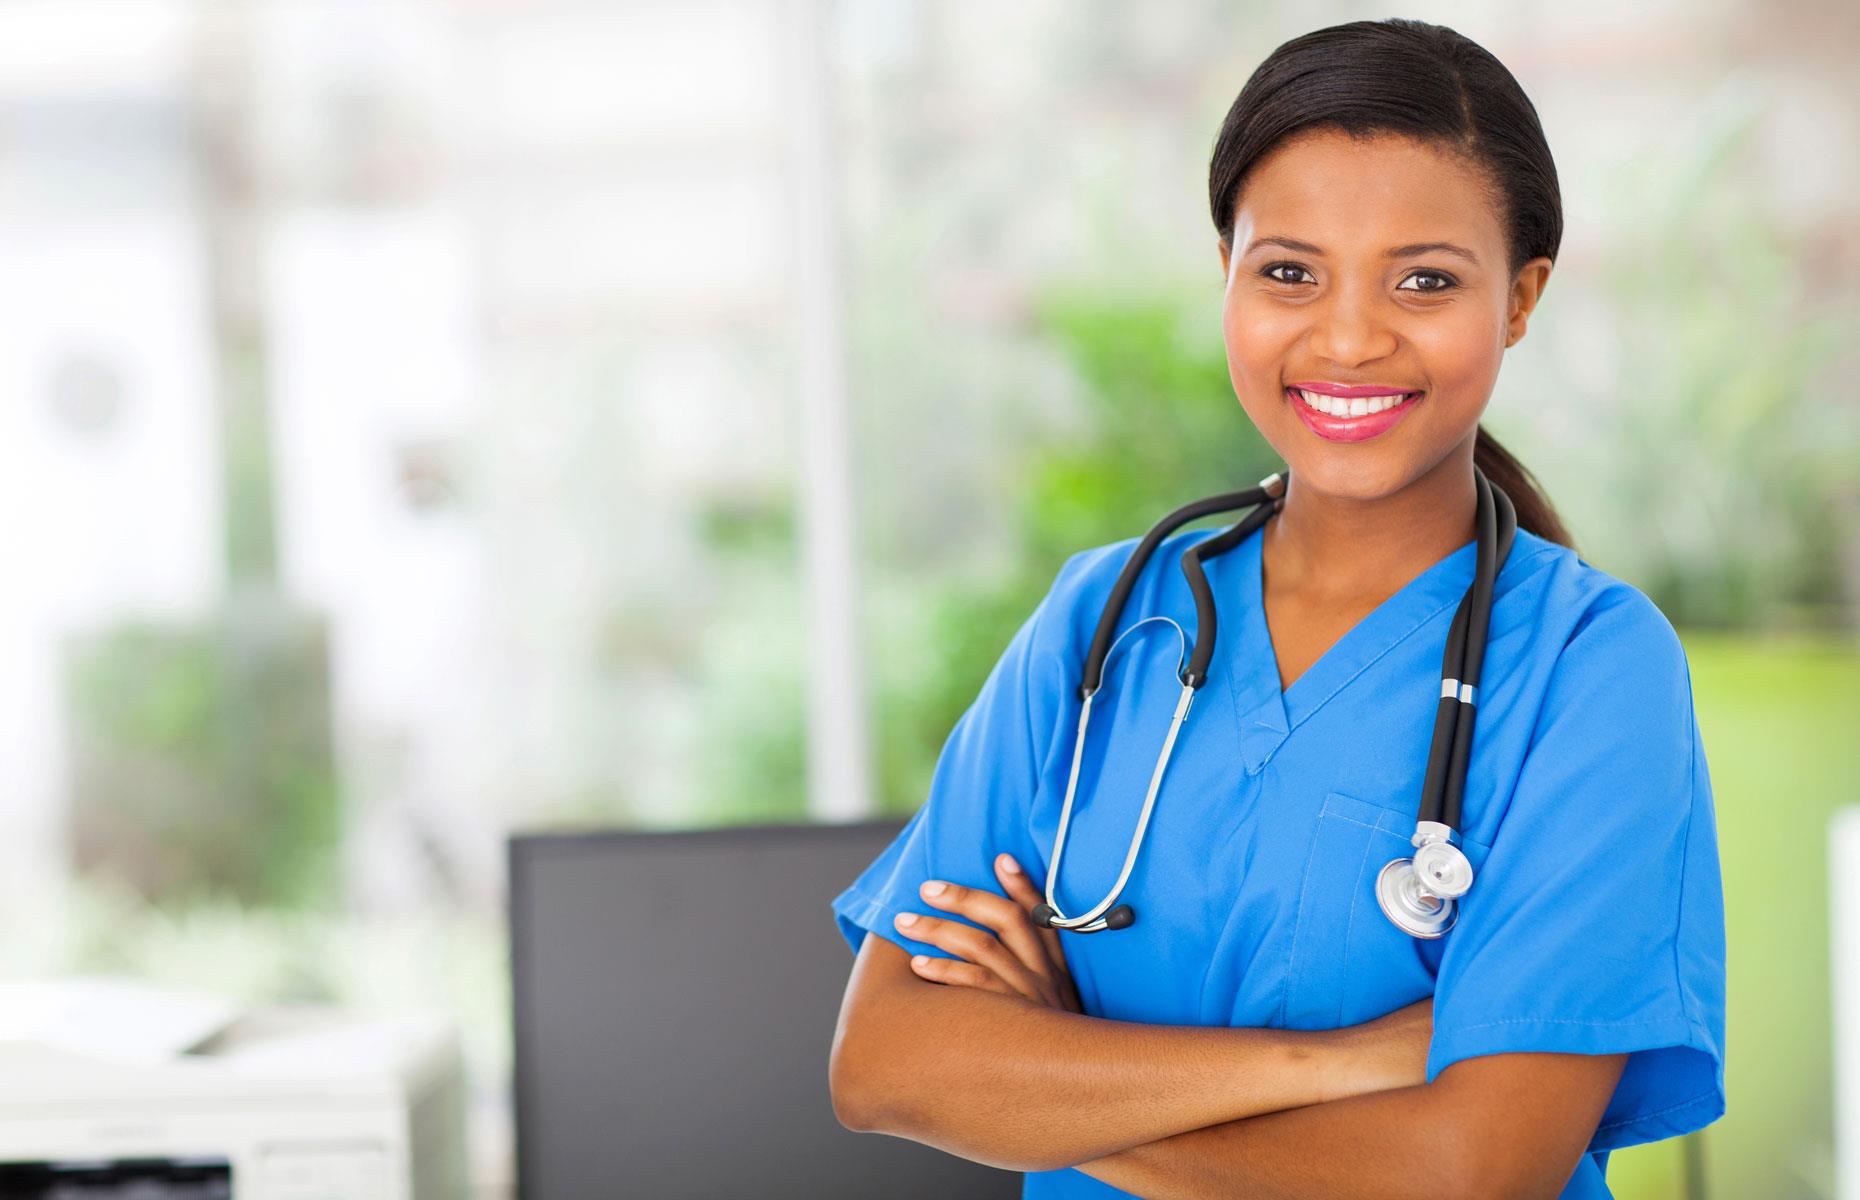 28) Nurse practitioner: 1,600 job openings a month